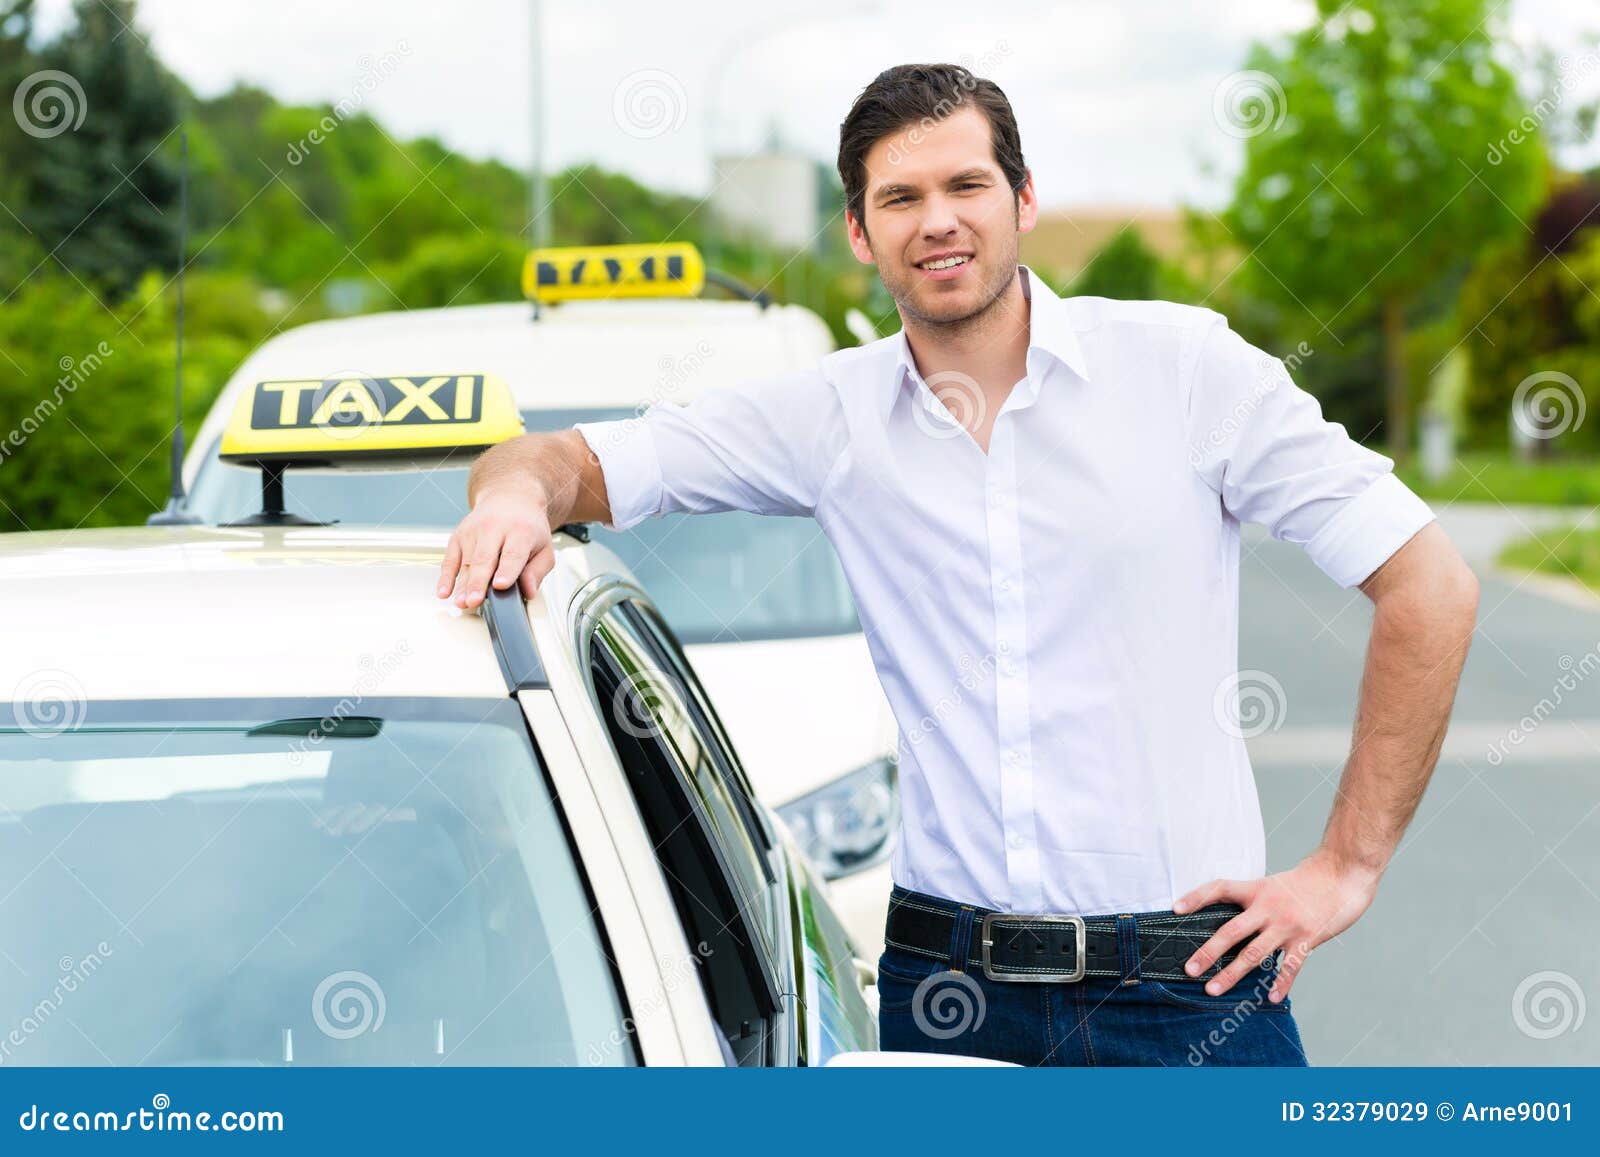 driver in front of taxi waiting for clients